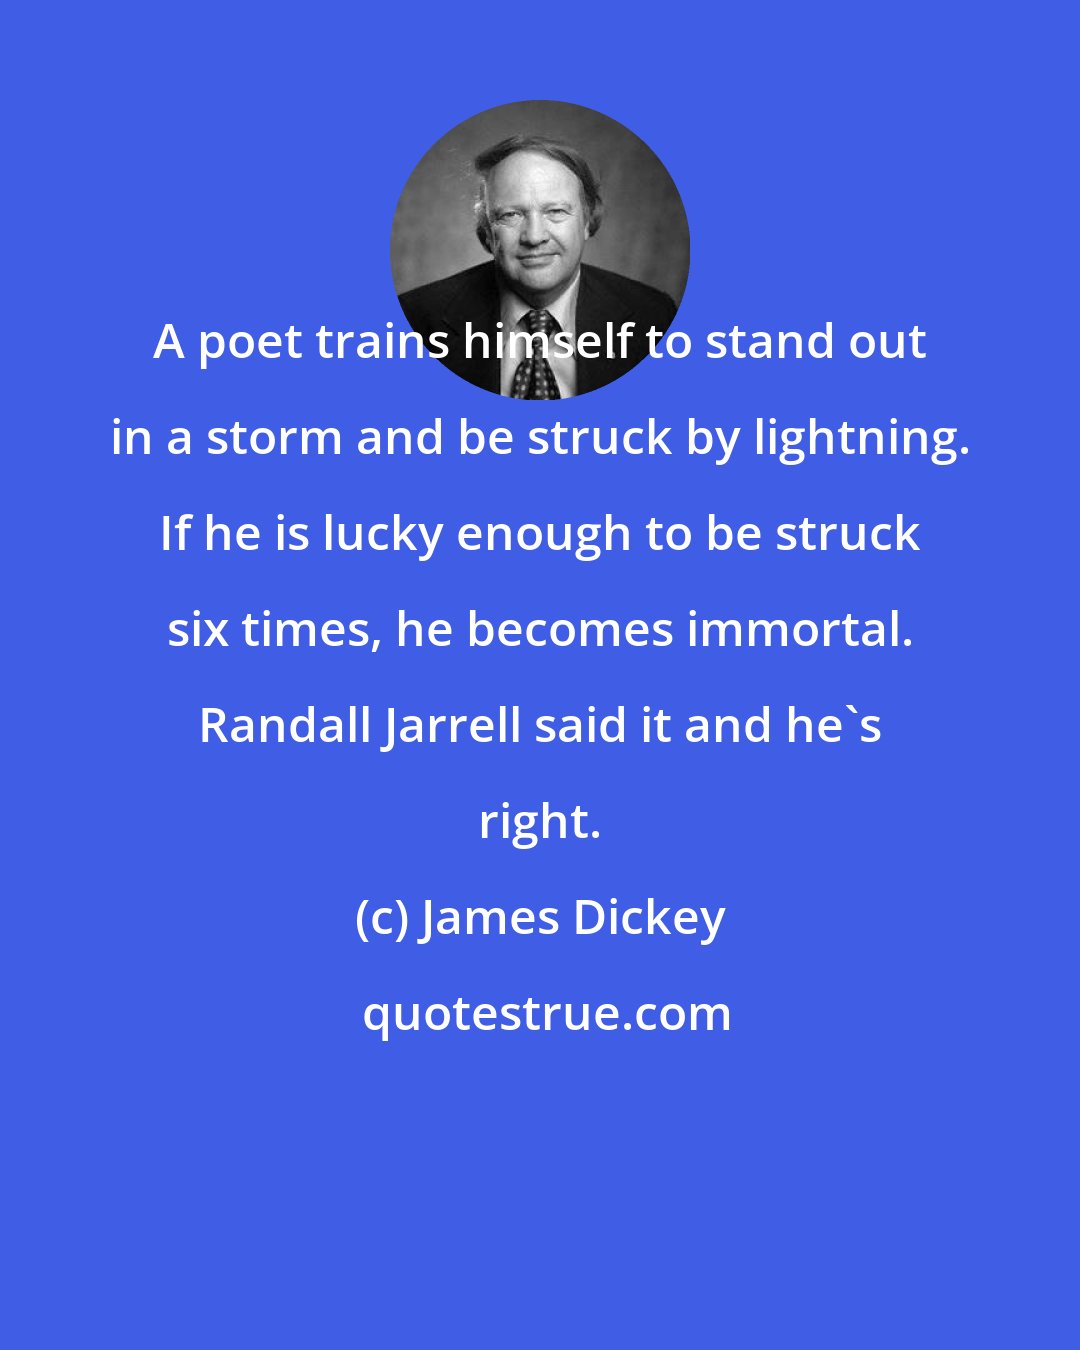 James Dickey: A poet trains himself to stand out in a storm and be struck by lightning. If he is lucky enough to be struck six times, he becomes immortal. Randall Jarrell said it and he's right.